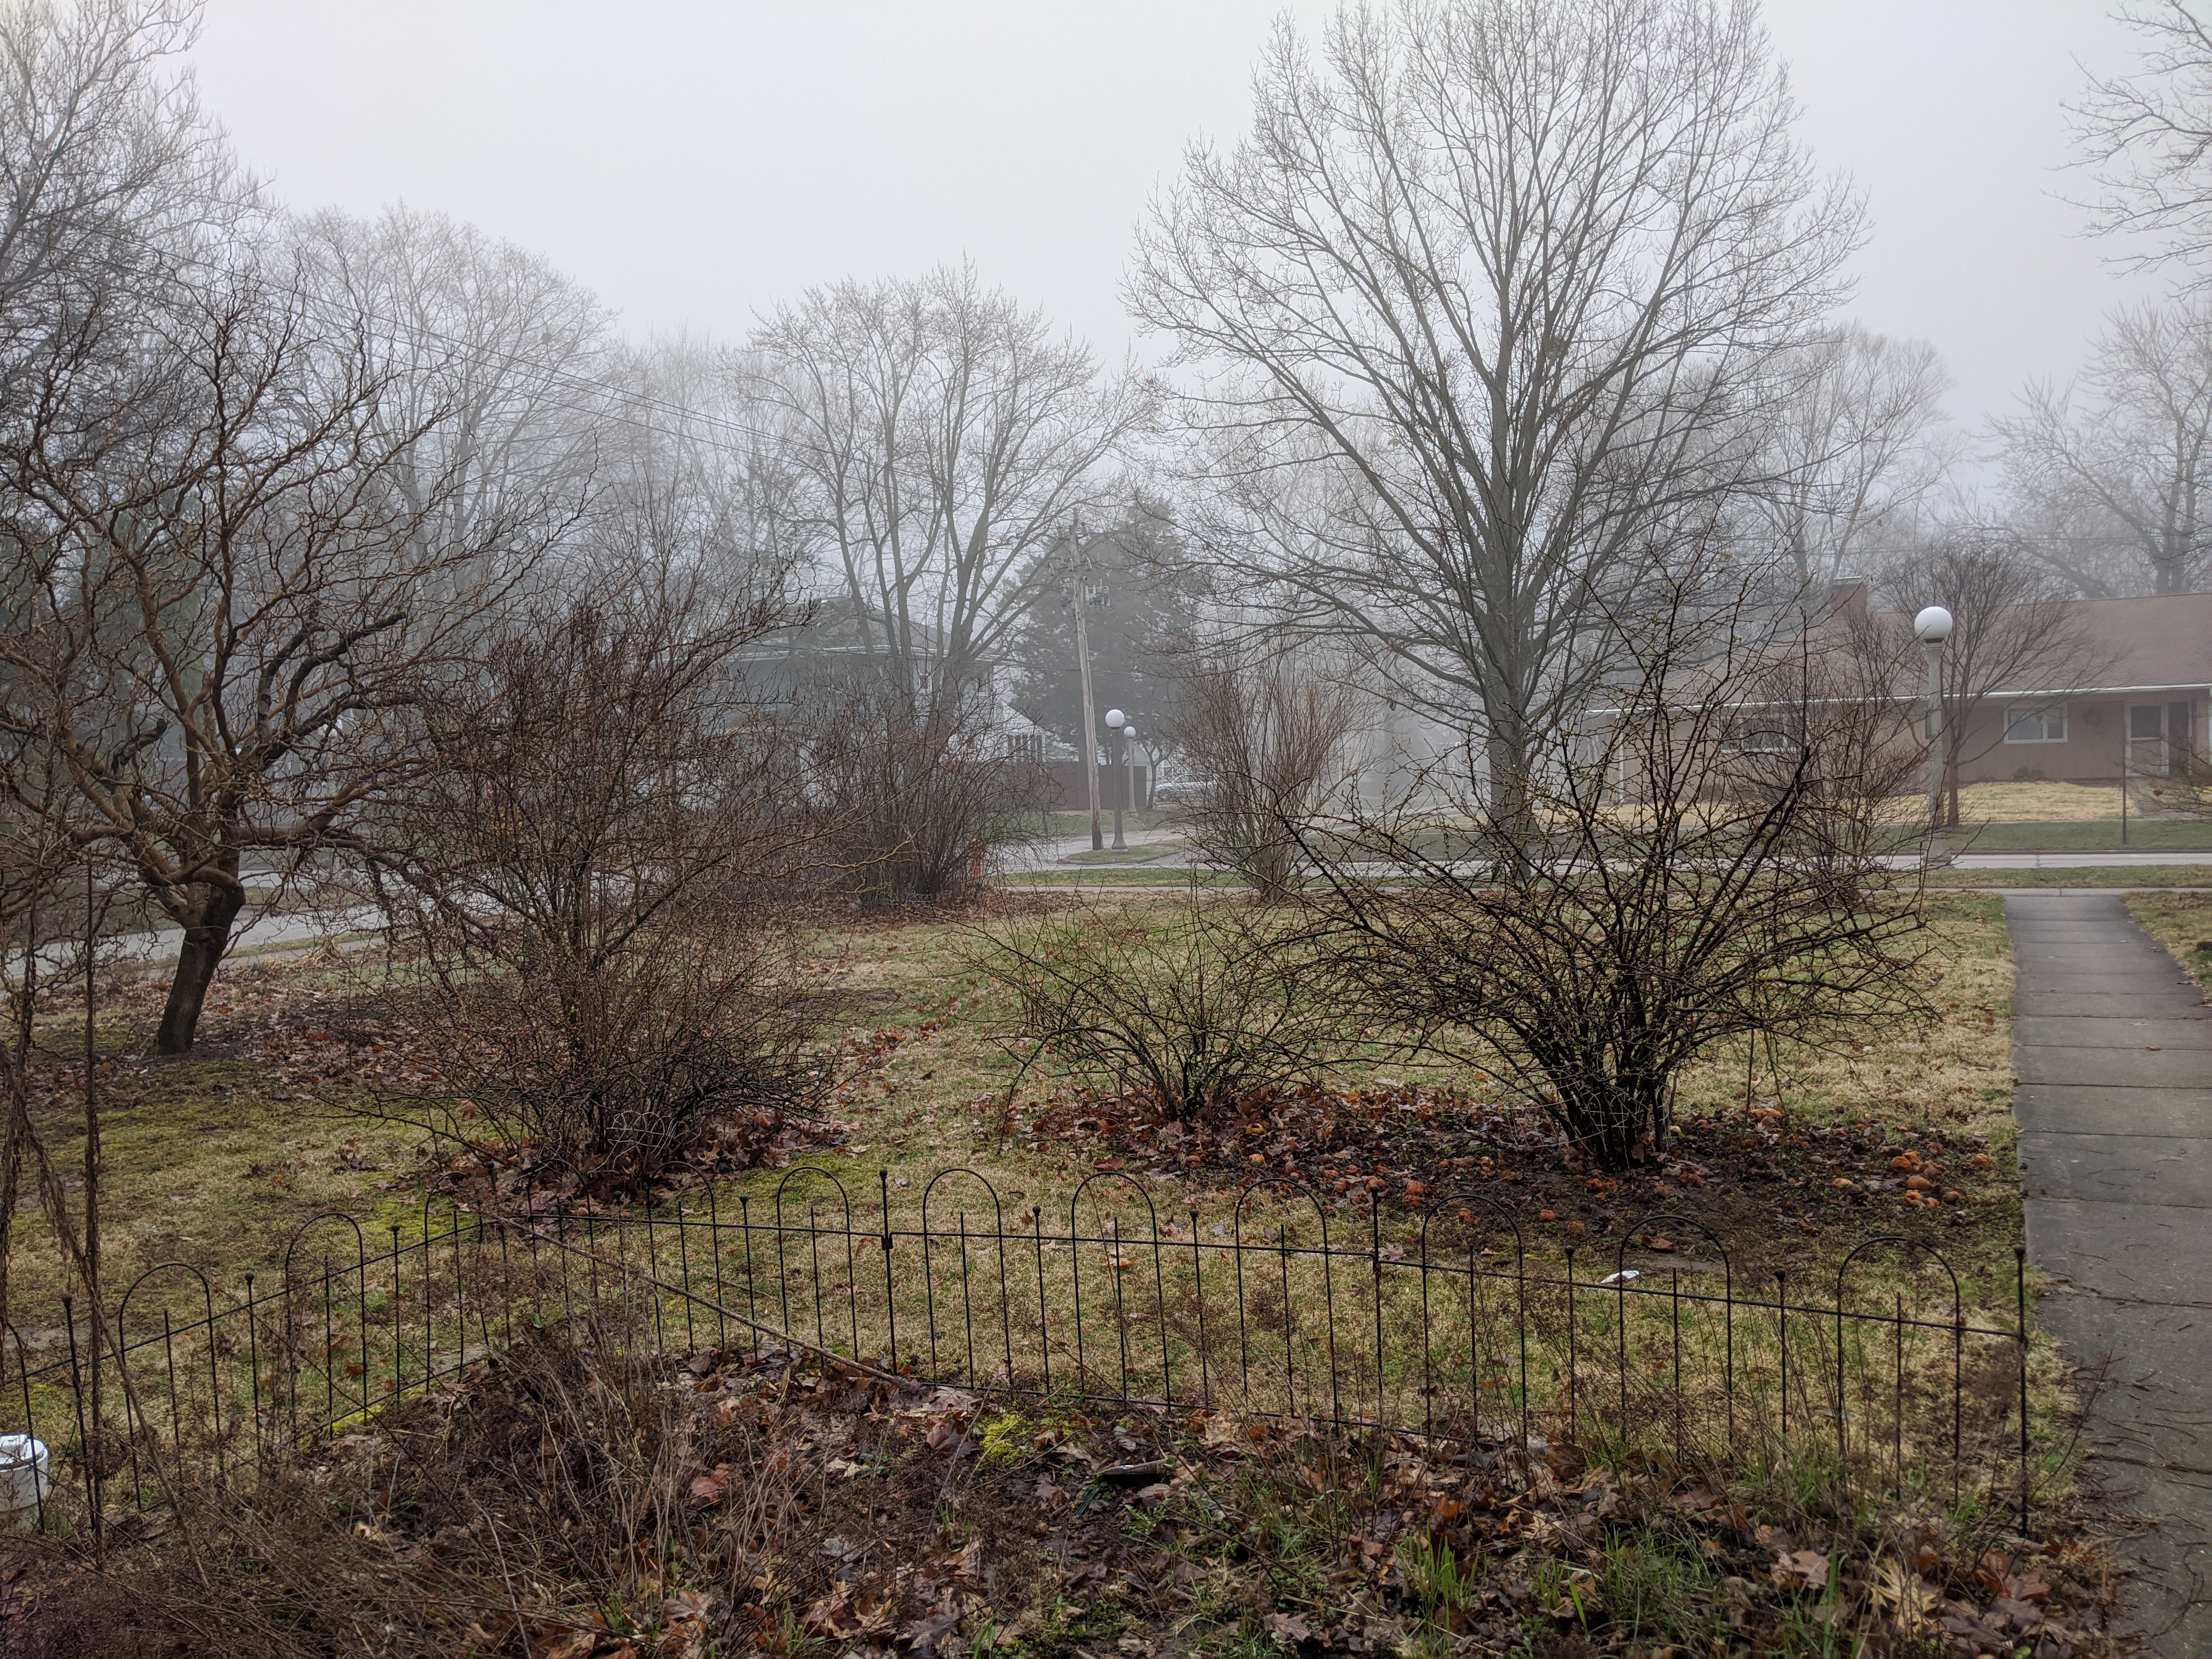 Margaret's front yard in the foggy gloom